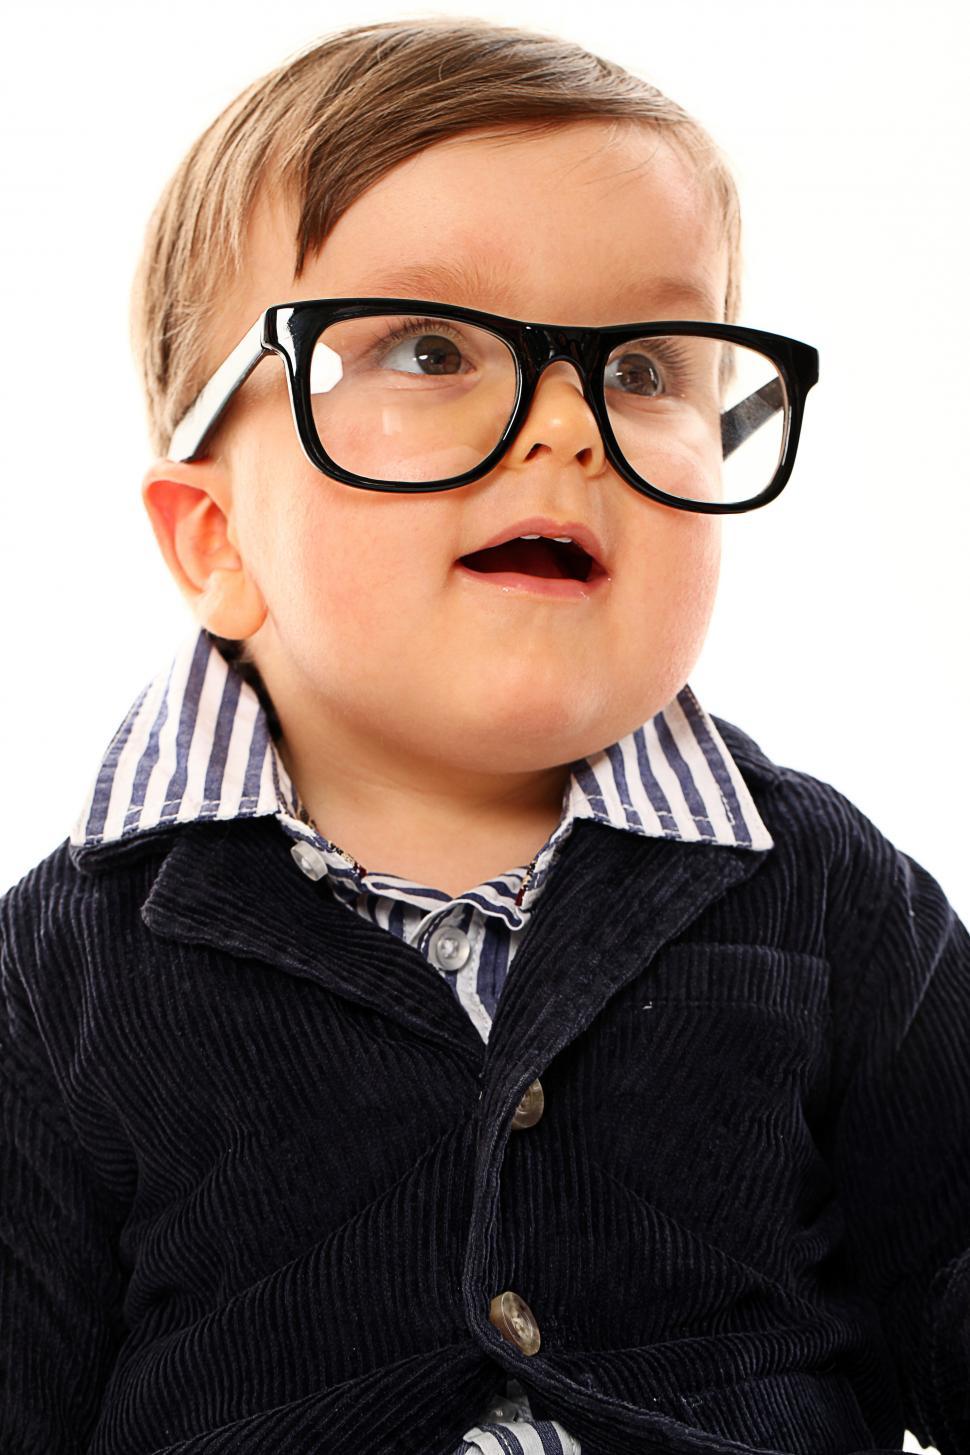 Free Image of Small boy wearing large glasses 